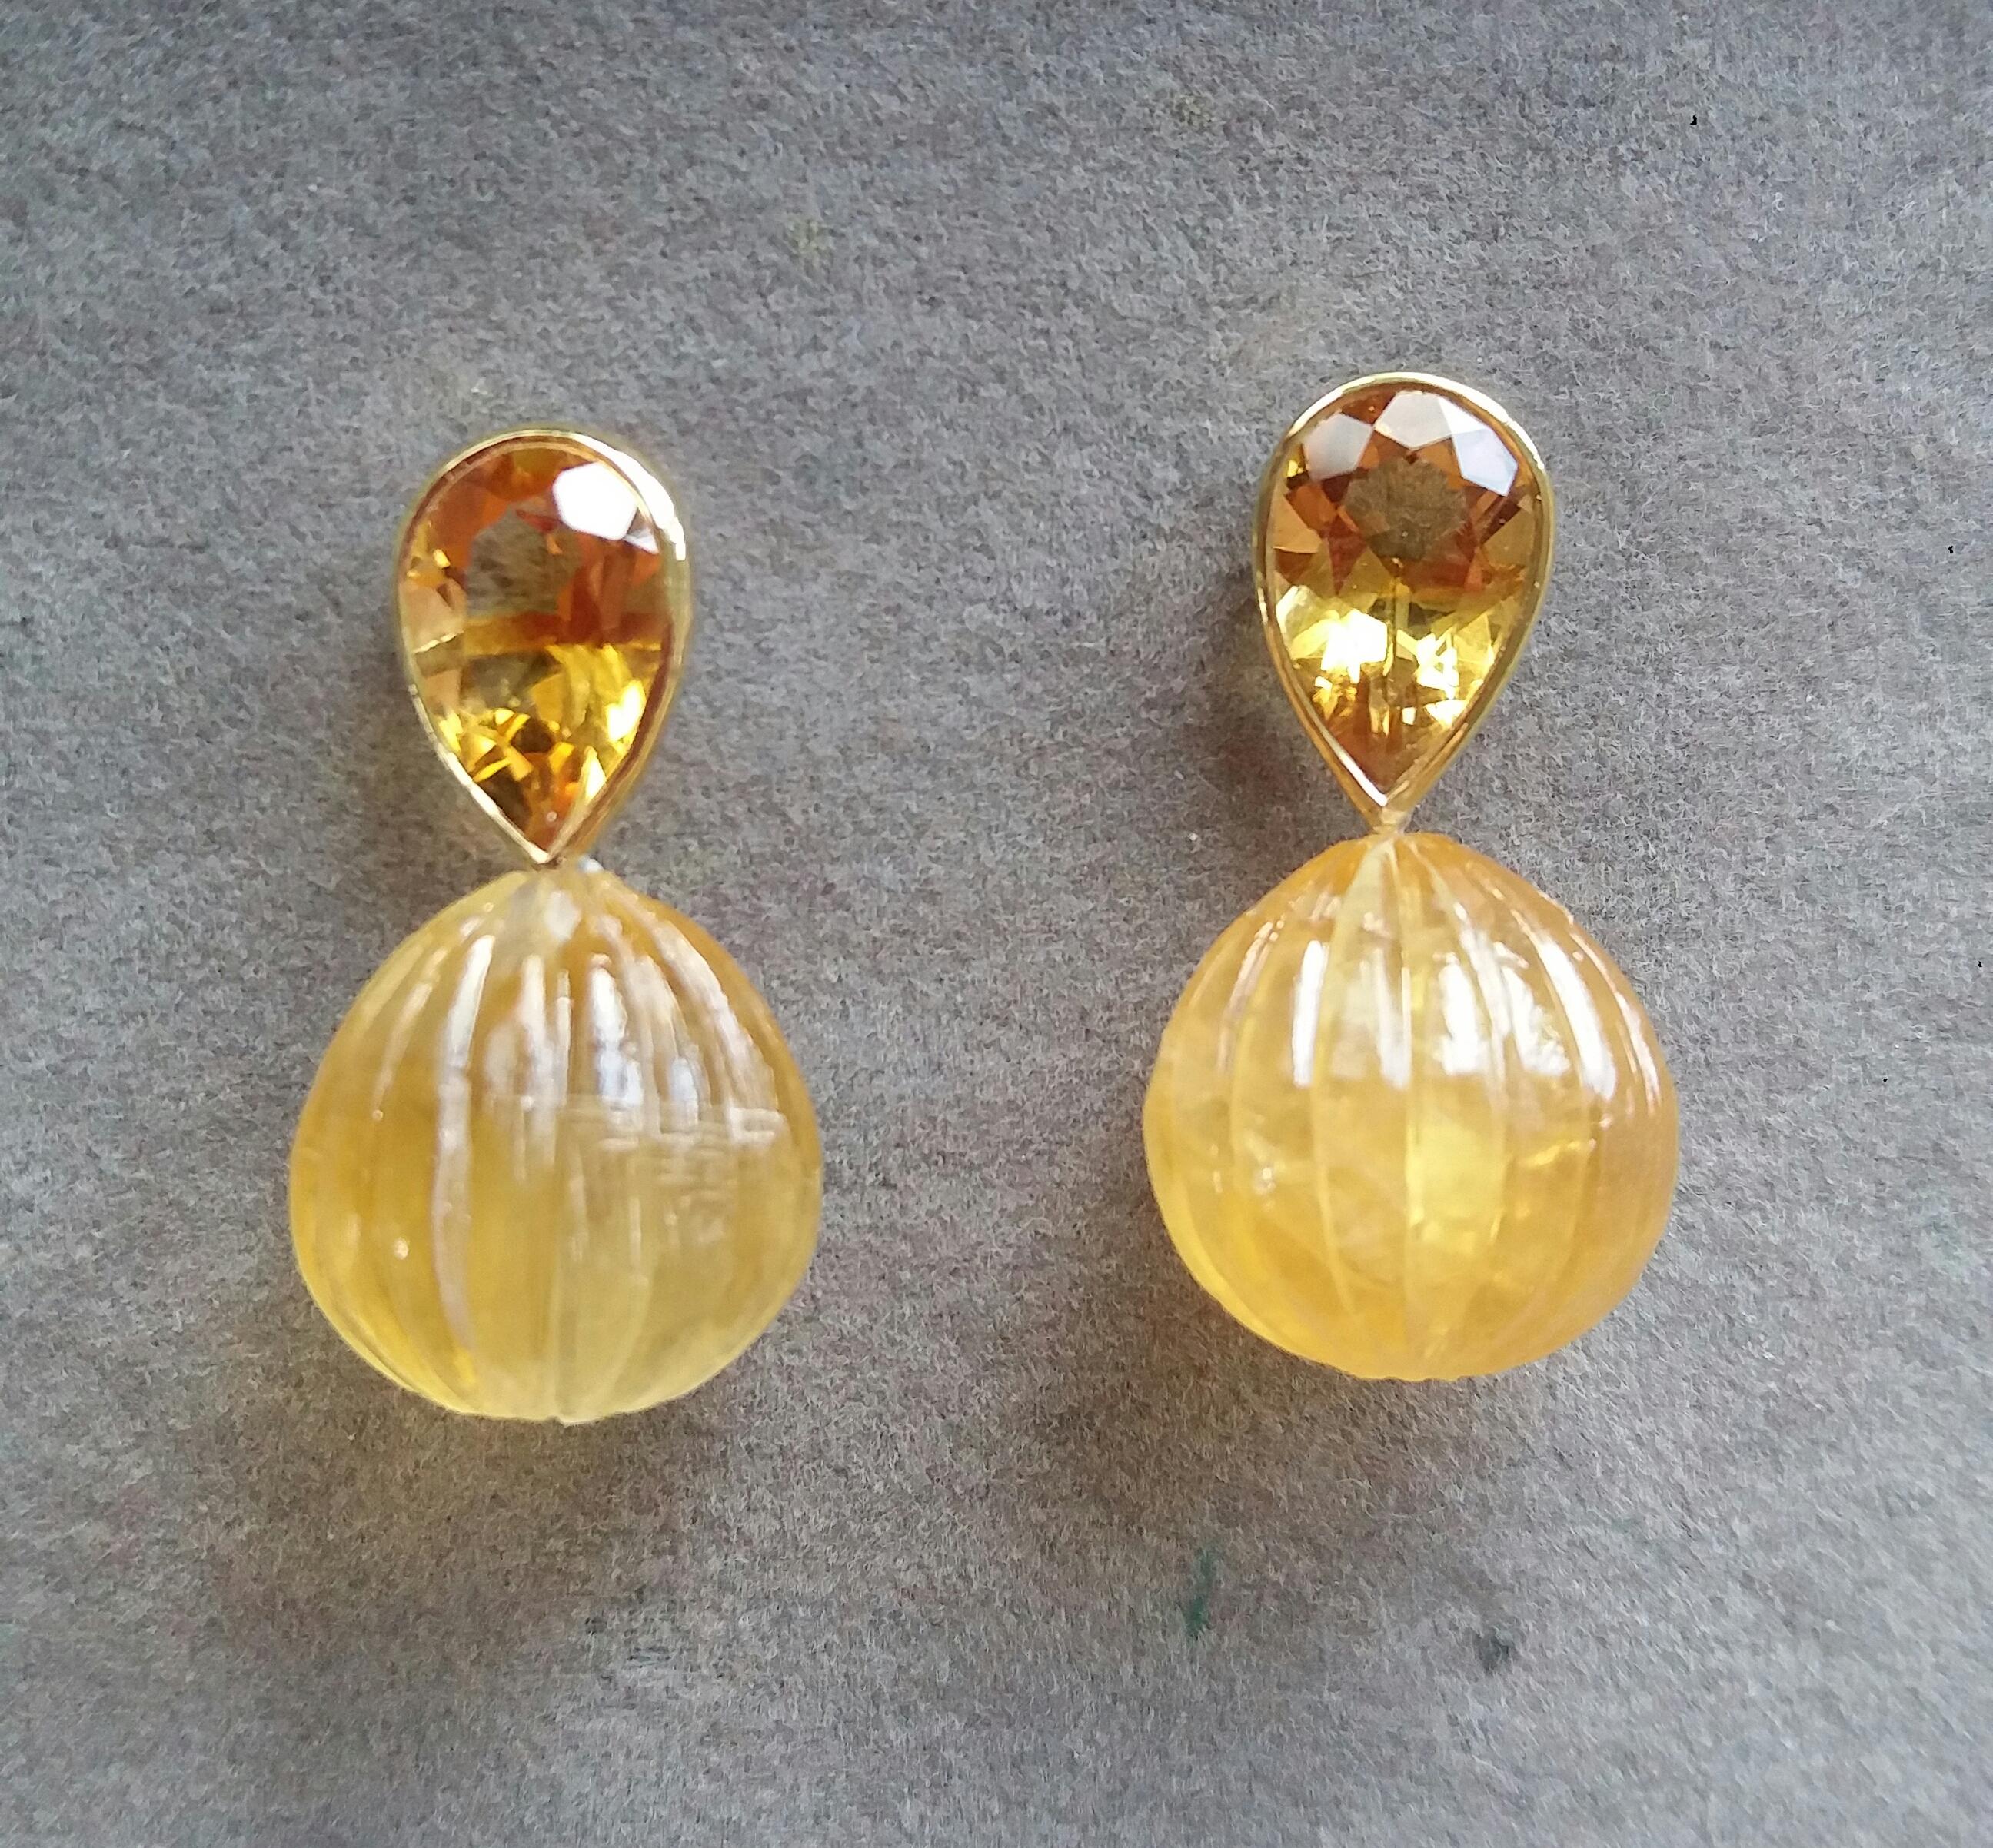 These simple but elegant and completely handmade earrings have 2 Pear Shape Faceted  Natural Citrines measuring 7 x 12 mm set in yellow gold bezel at the top to which are suspended 2  Engraved Citrine Round Drops measuring 15x15 mm.

In 1978 our